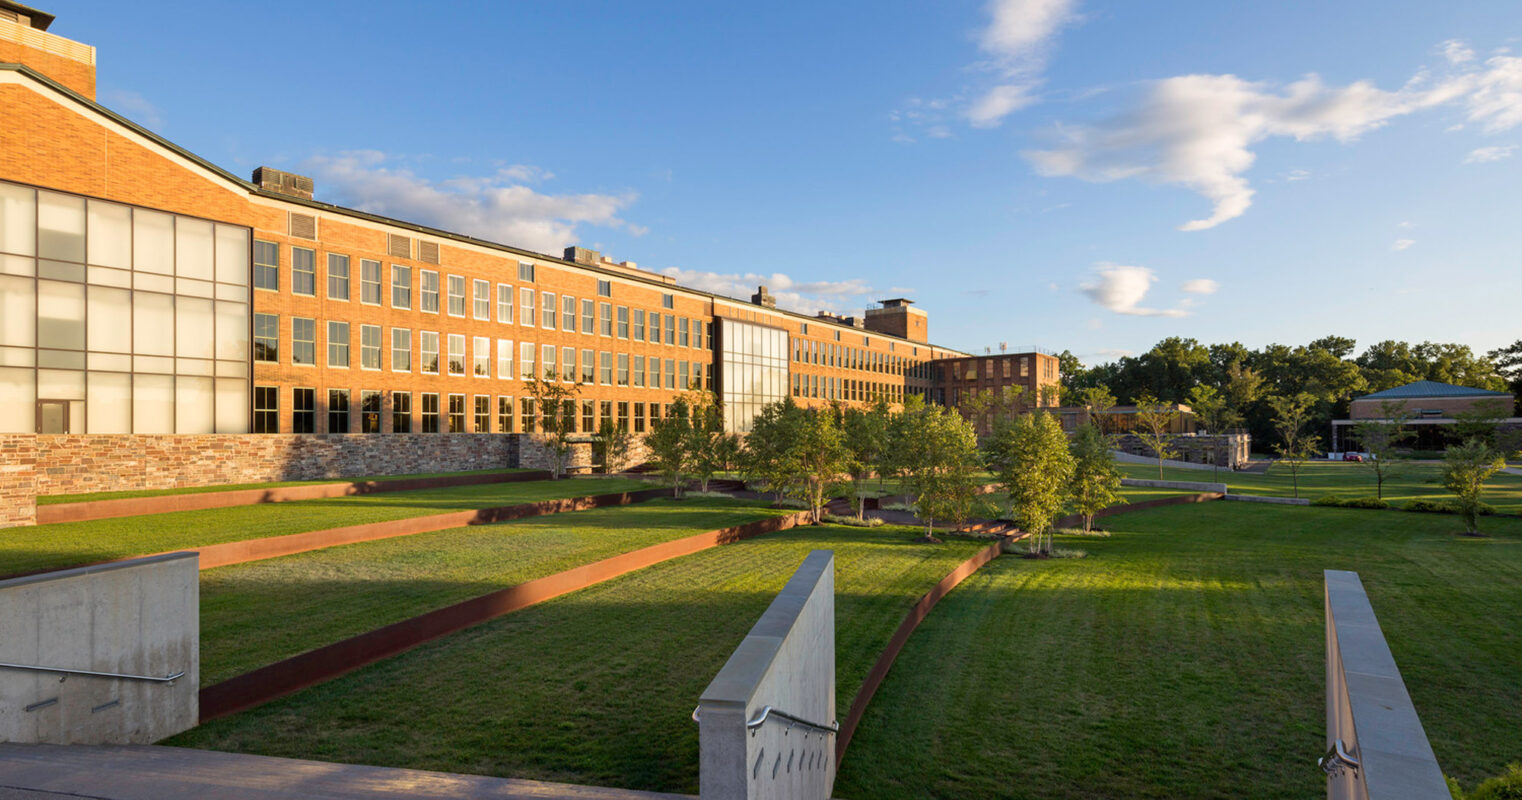 Modern educational facility with a blend of traditional brickwork and contemporary glass facade, landscaped with green lawns, geometric walkways, and young trees, under a clear blue sky.